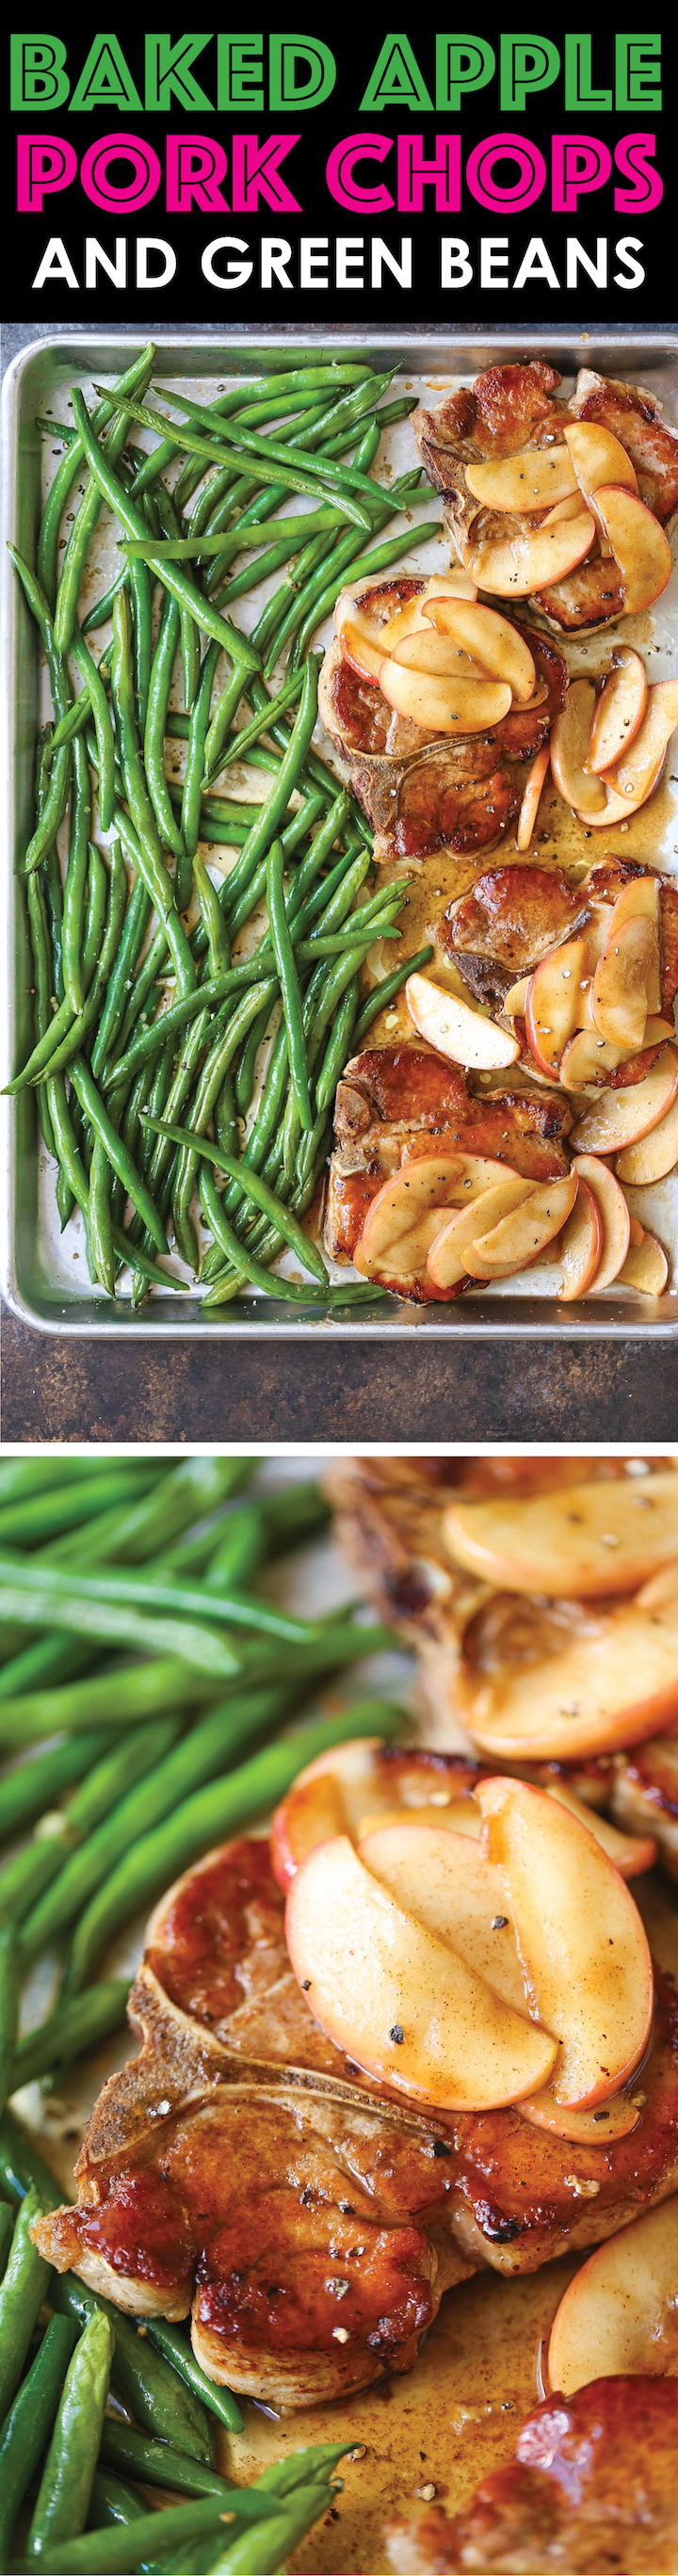 Baked Apple Pork Chops and Green Beans - A quick and easy sheet pan dinner that can be assembled ahead of time and baked right before serving. Easy peasy!